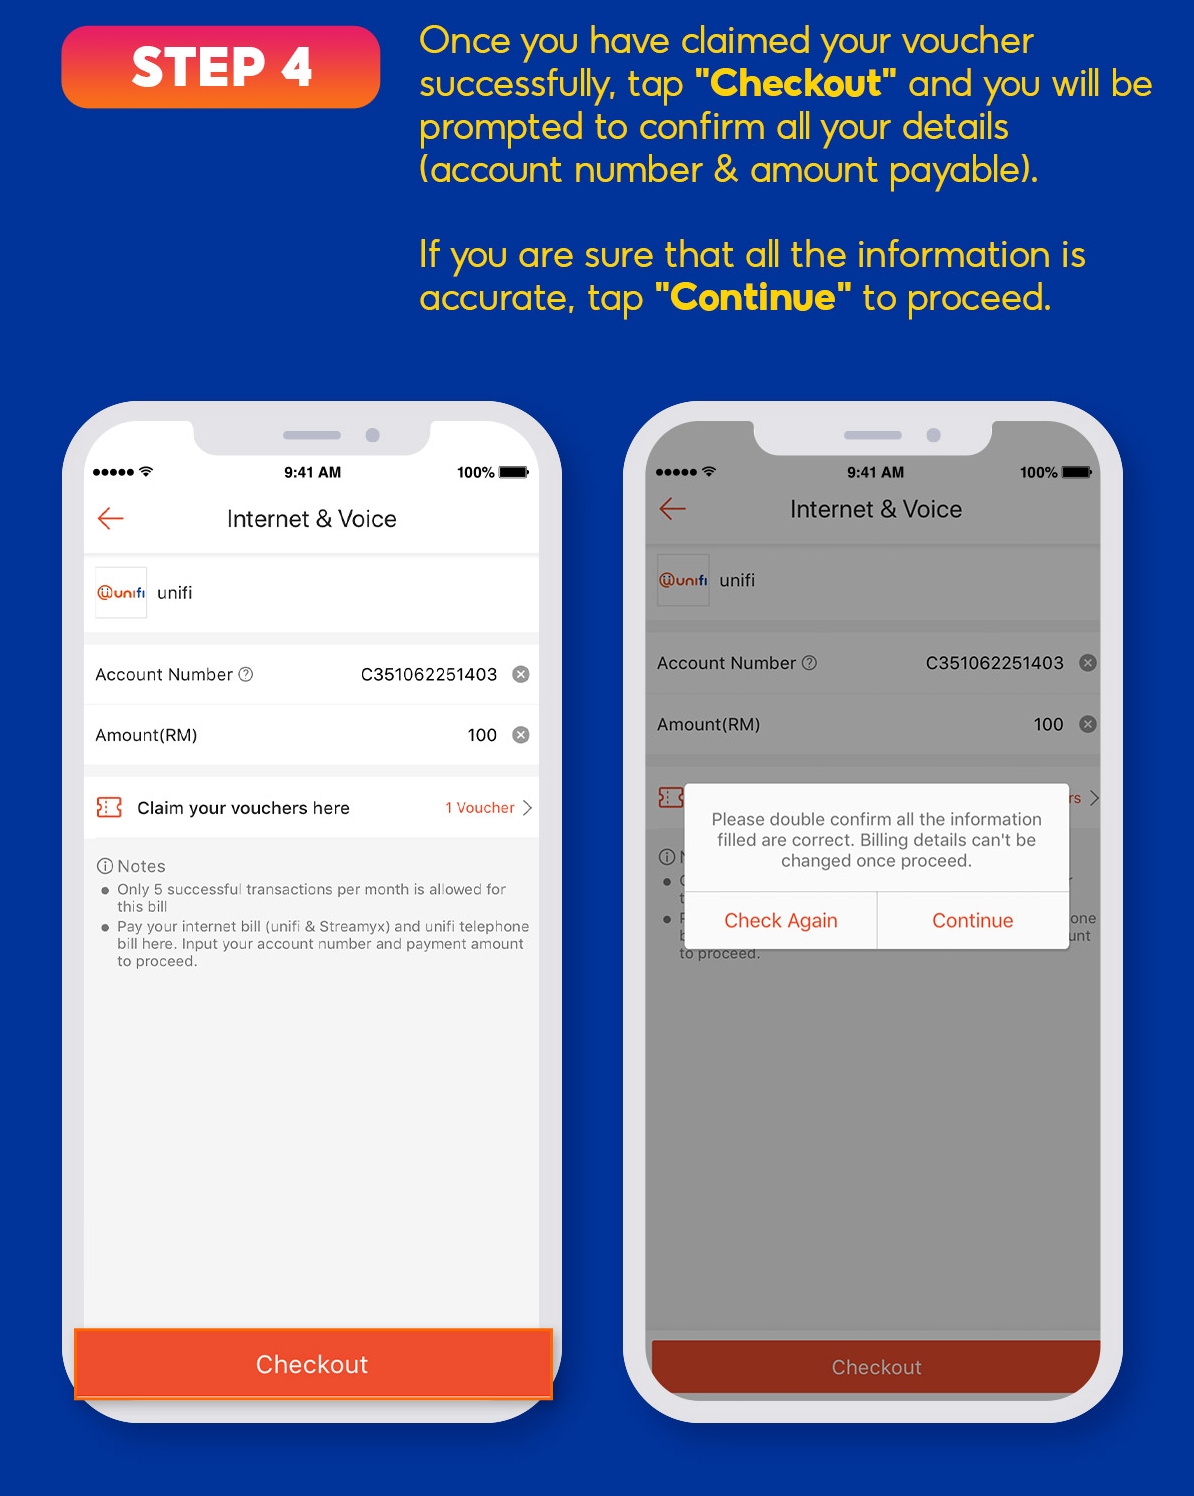 shopee-offers-10-rebate-if-you-pay-your-unifi-bill-via-the-app-but